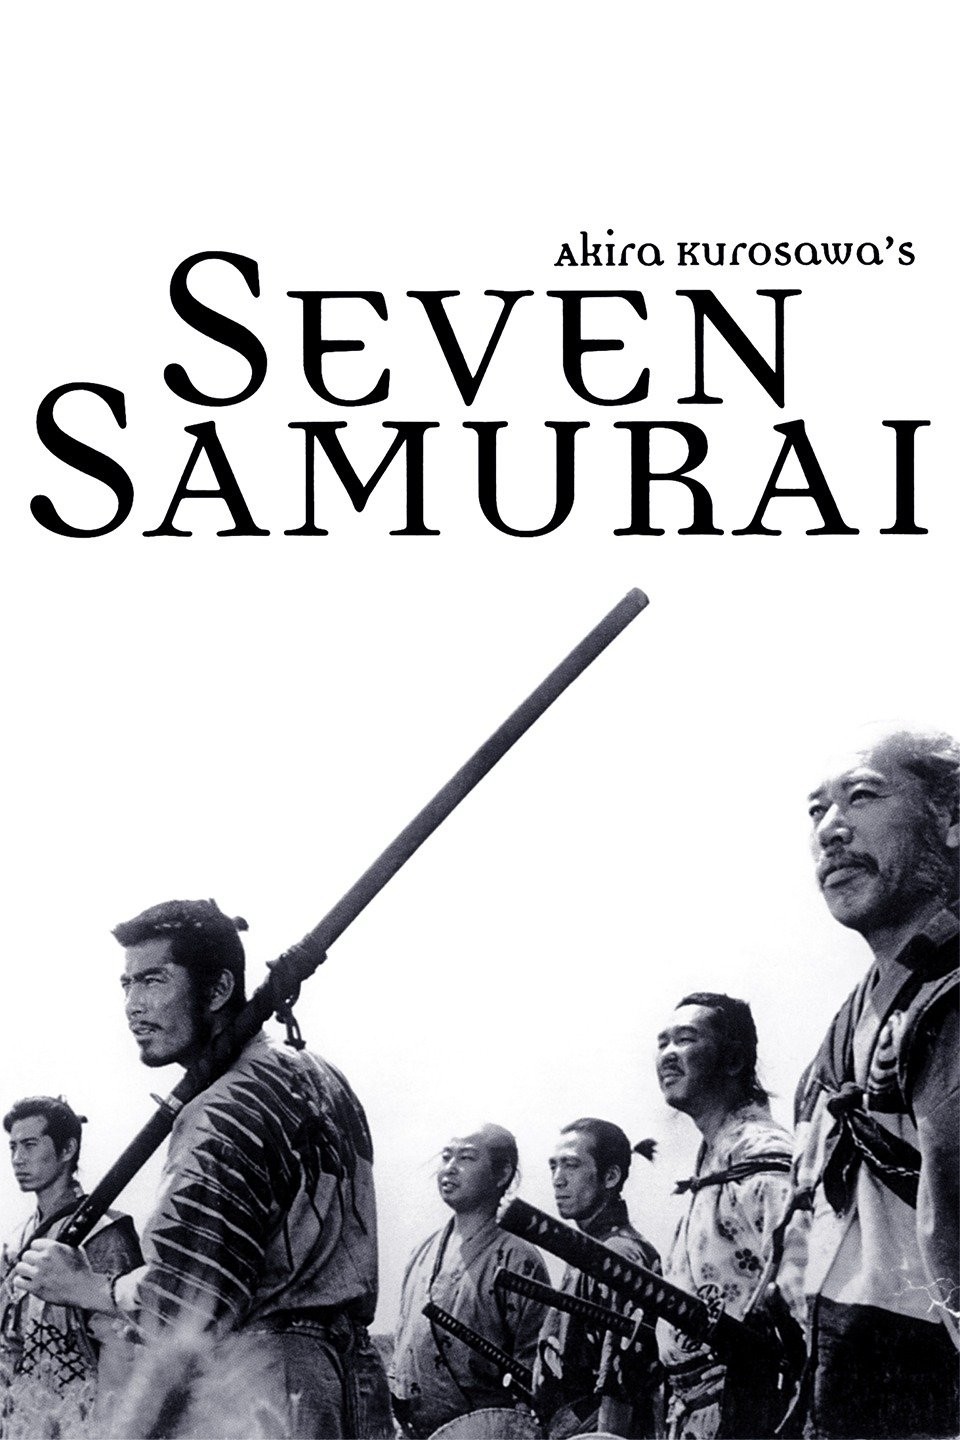 brent jennett recommends samurai movies in english pic